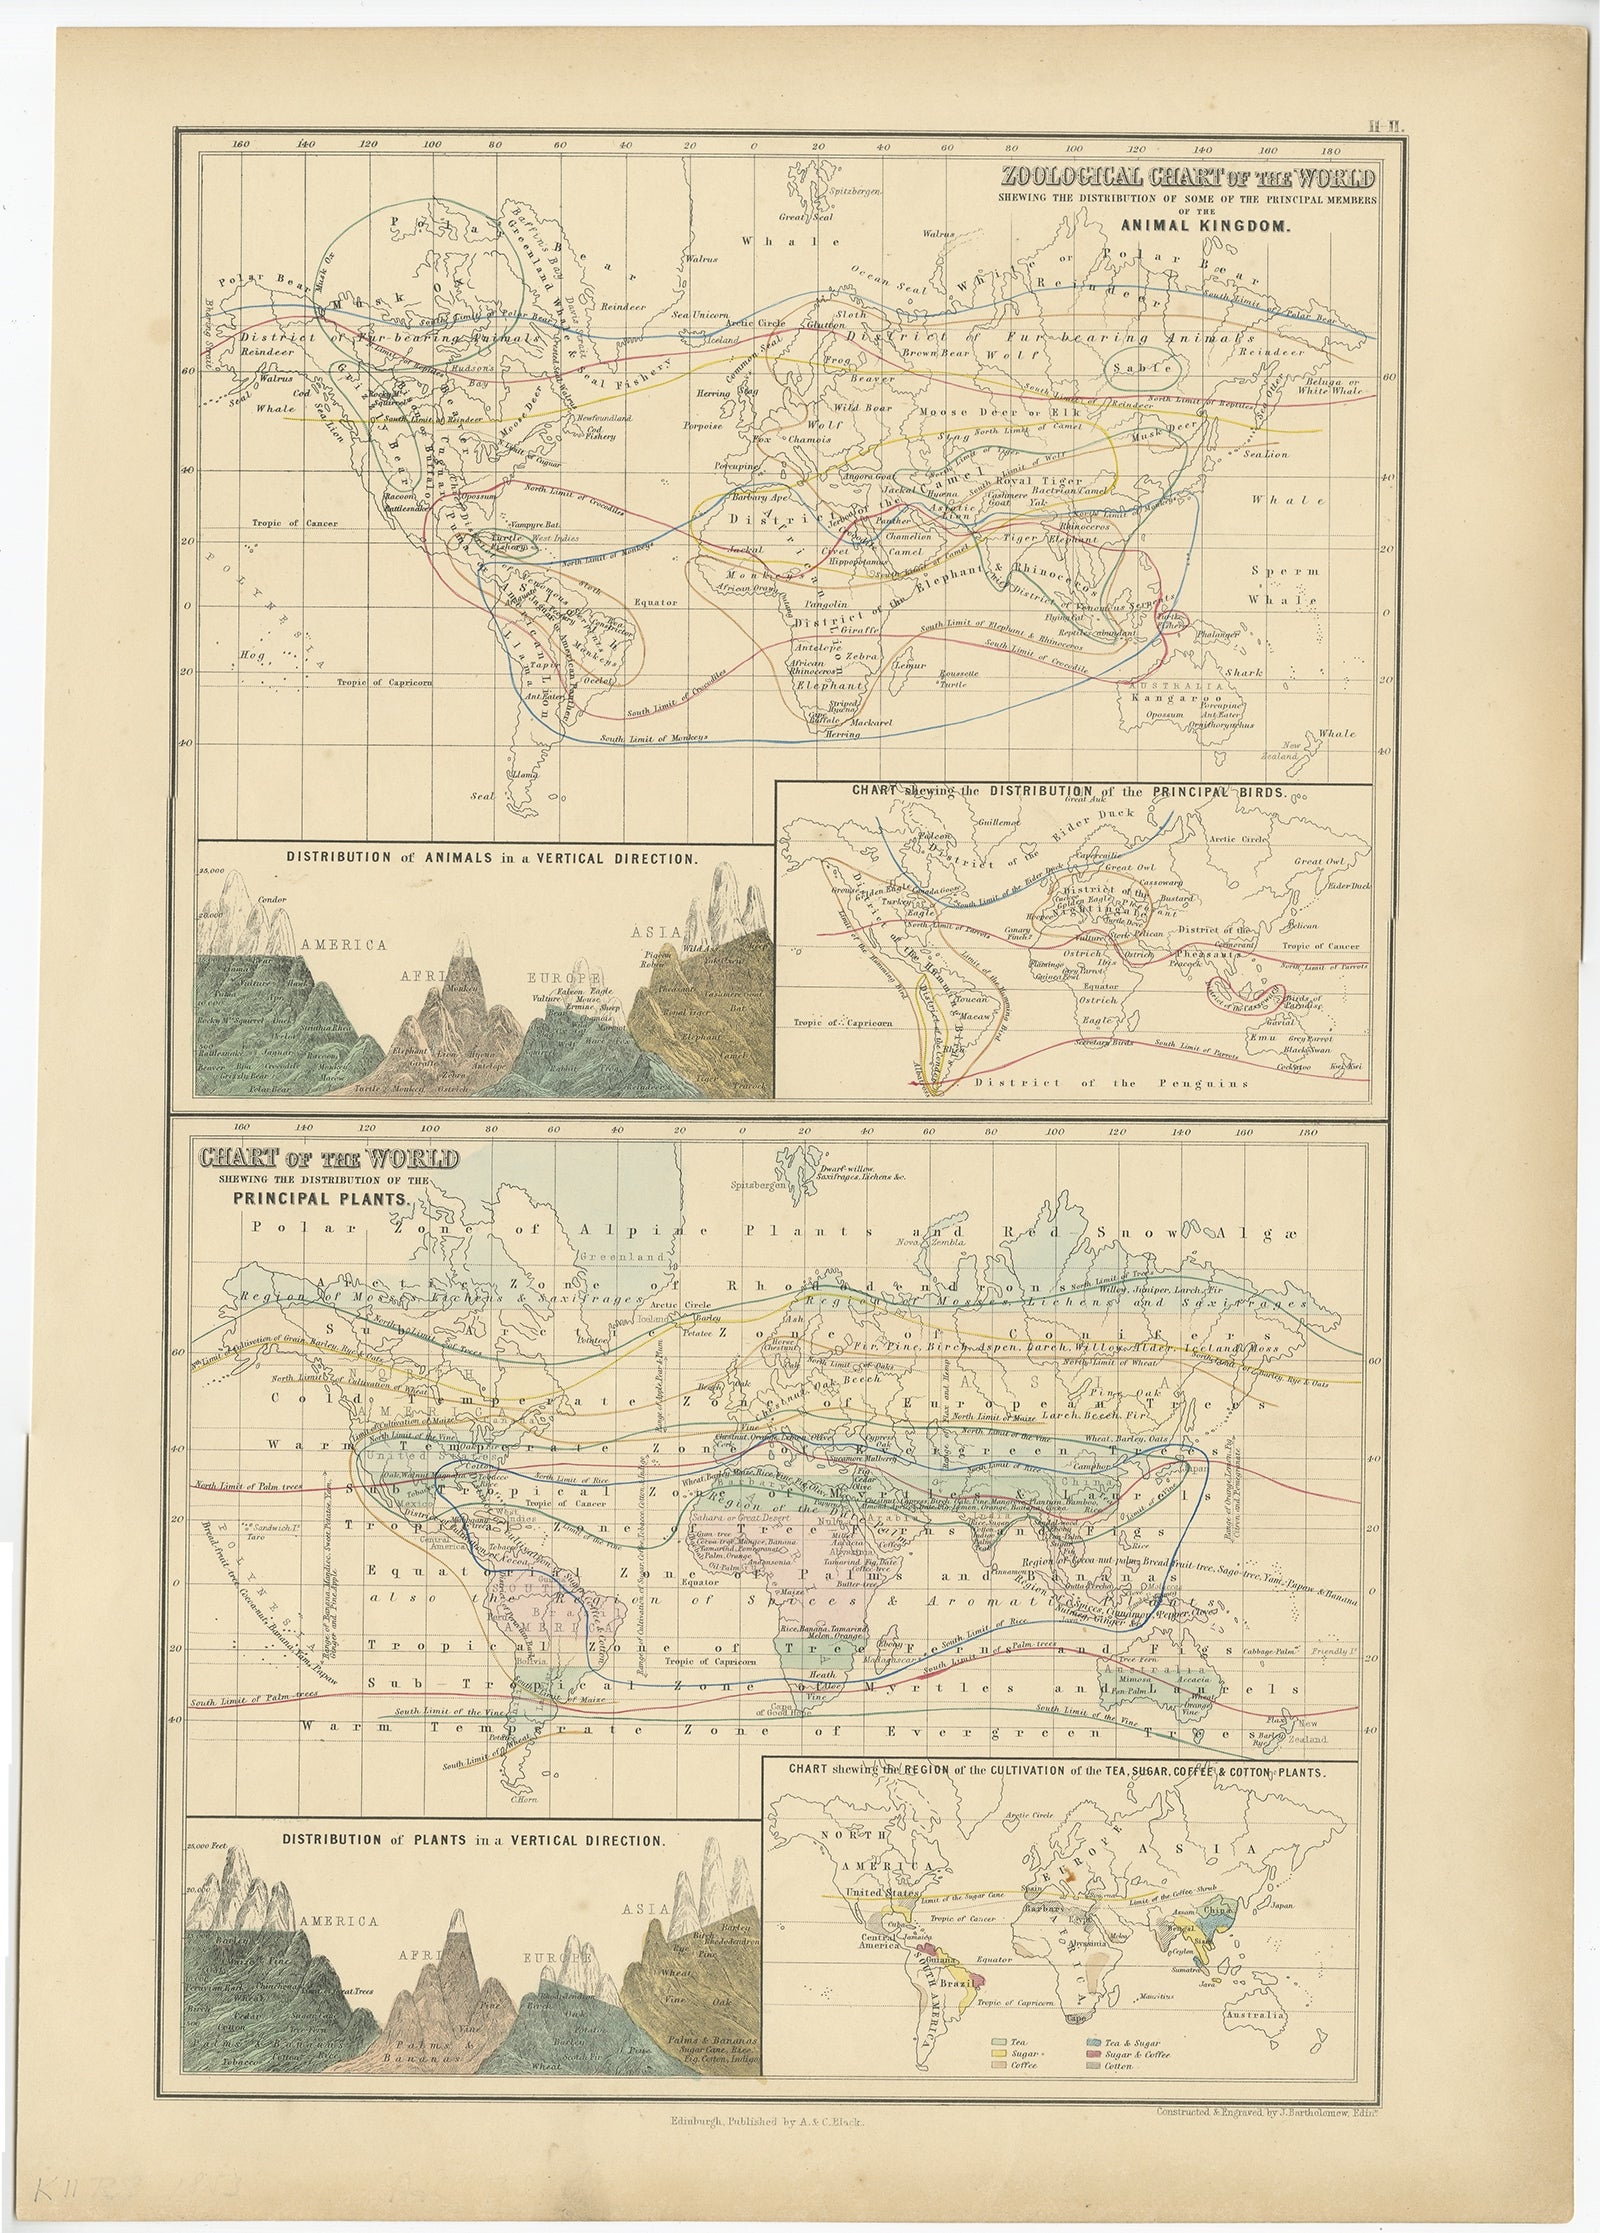 Antique map titled 'Zoological Chart of the World'. Total of six maps and insets. Insets of the distribution of Animals in a vertical direction, Chart of the Distribution of the Principal Birds, Distribution of Plants in a Vertical Direction, and